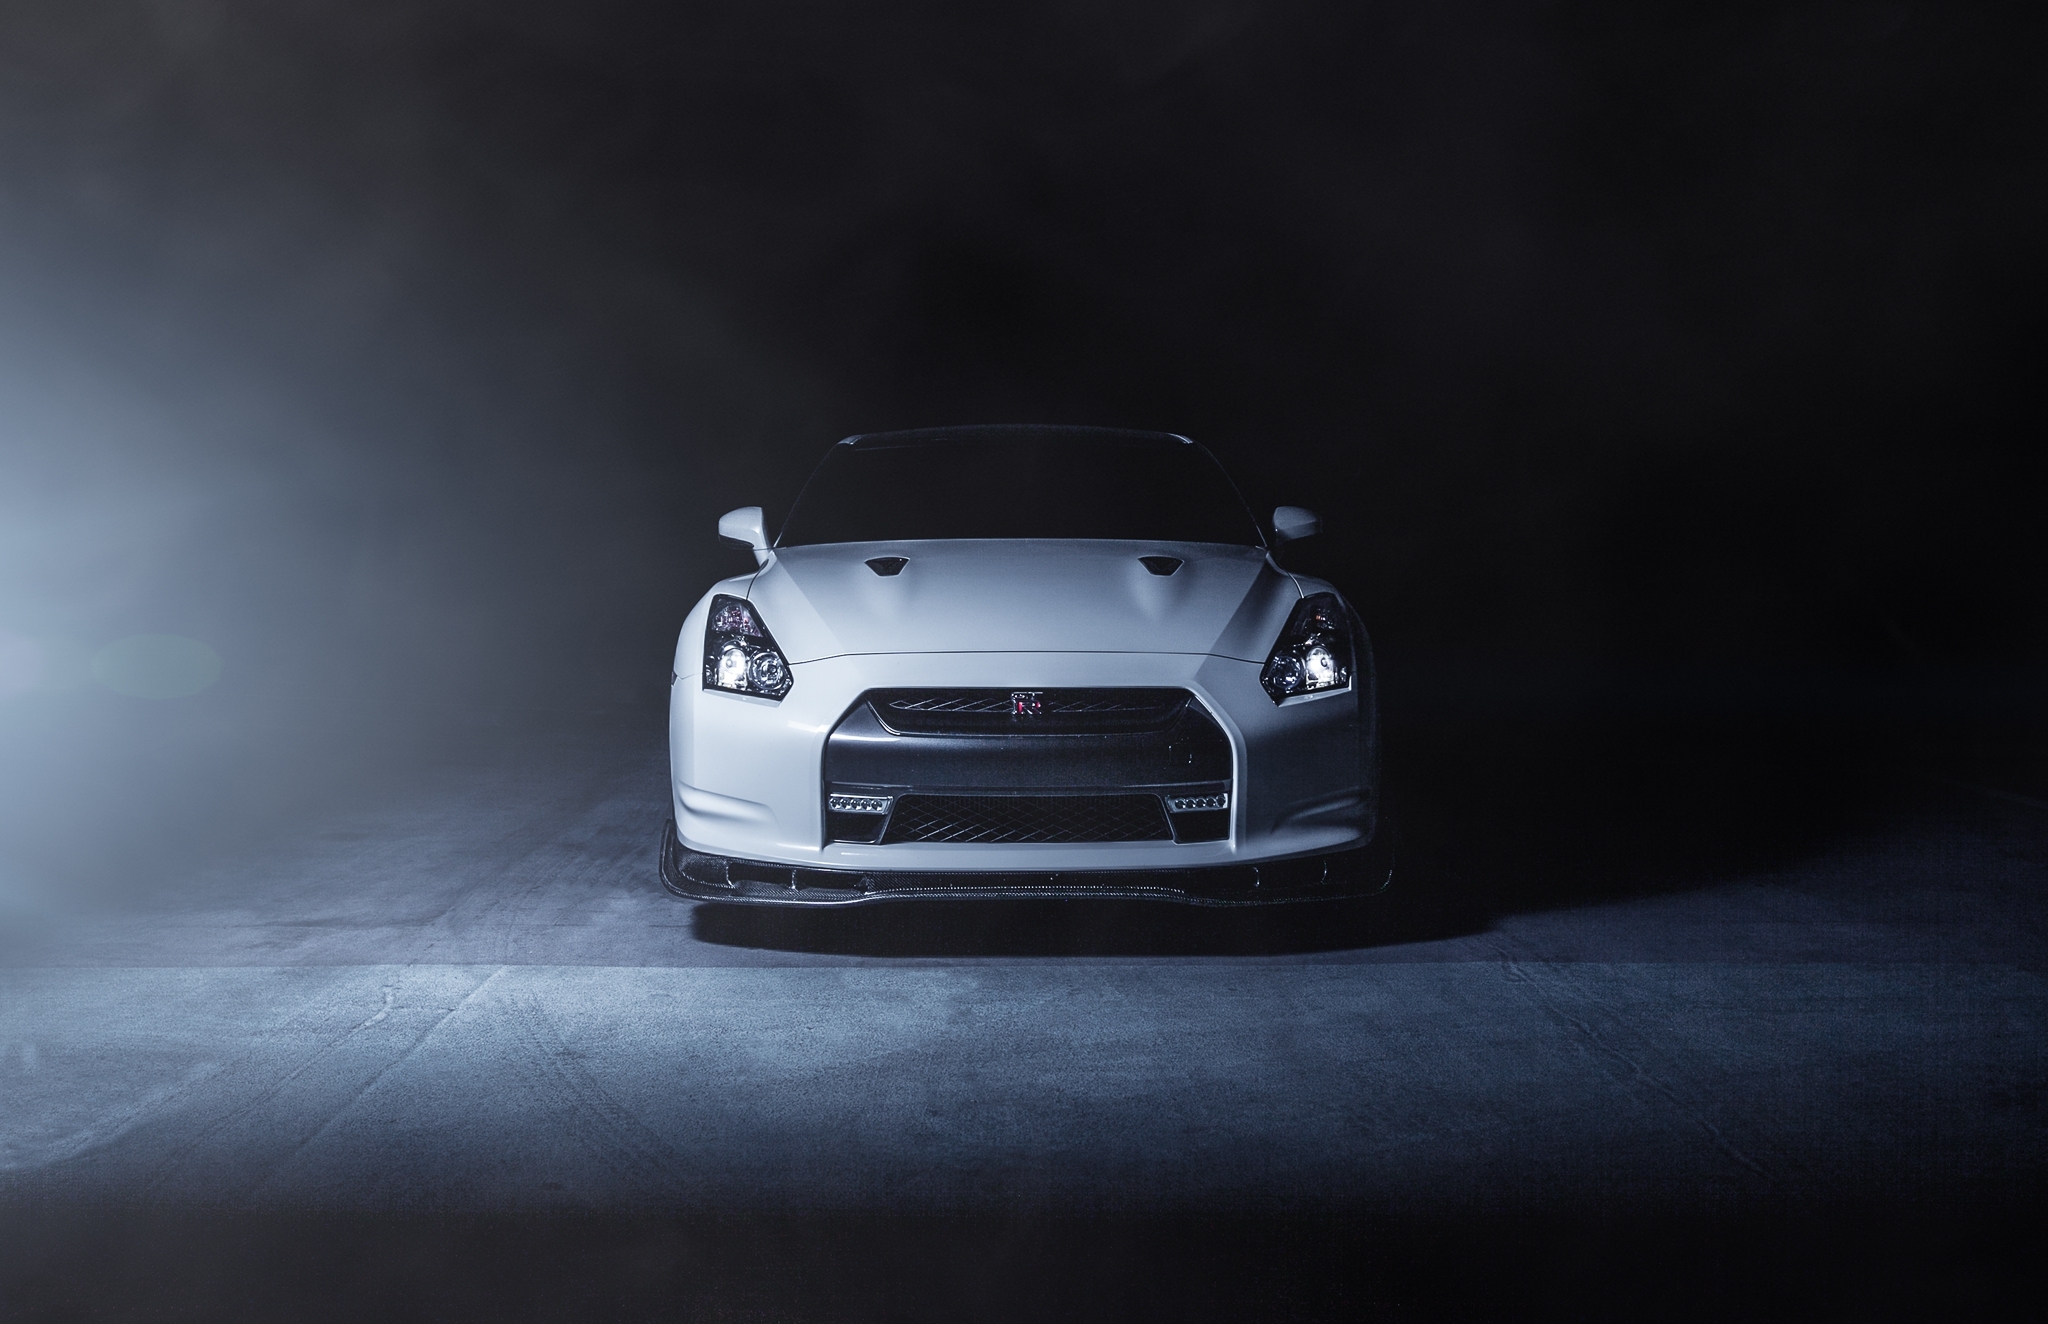 nissan, cars, white, smoke, gt r, front end, limber, r35 Full HD